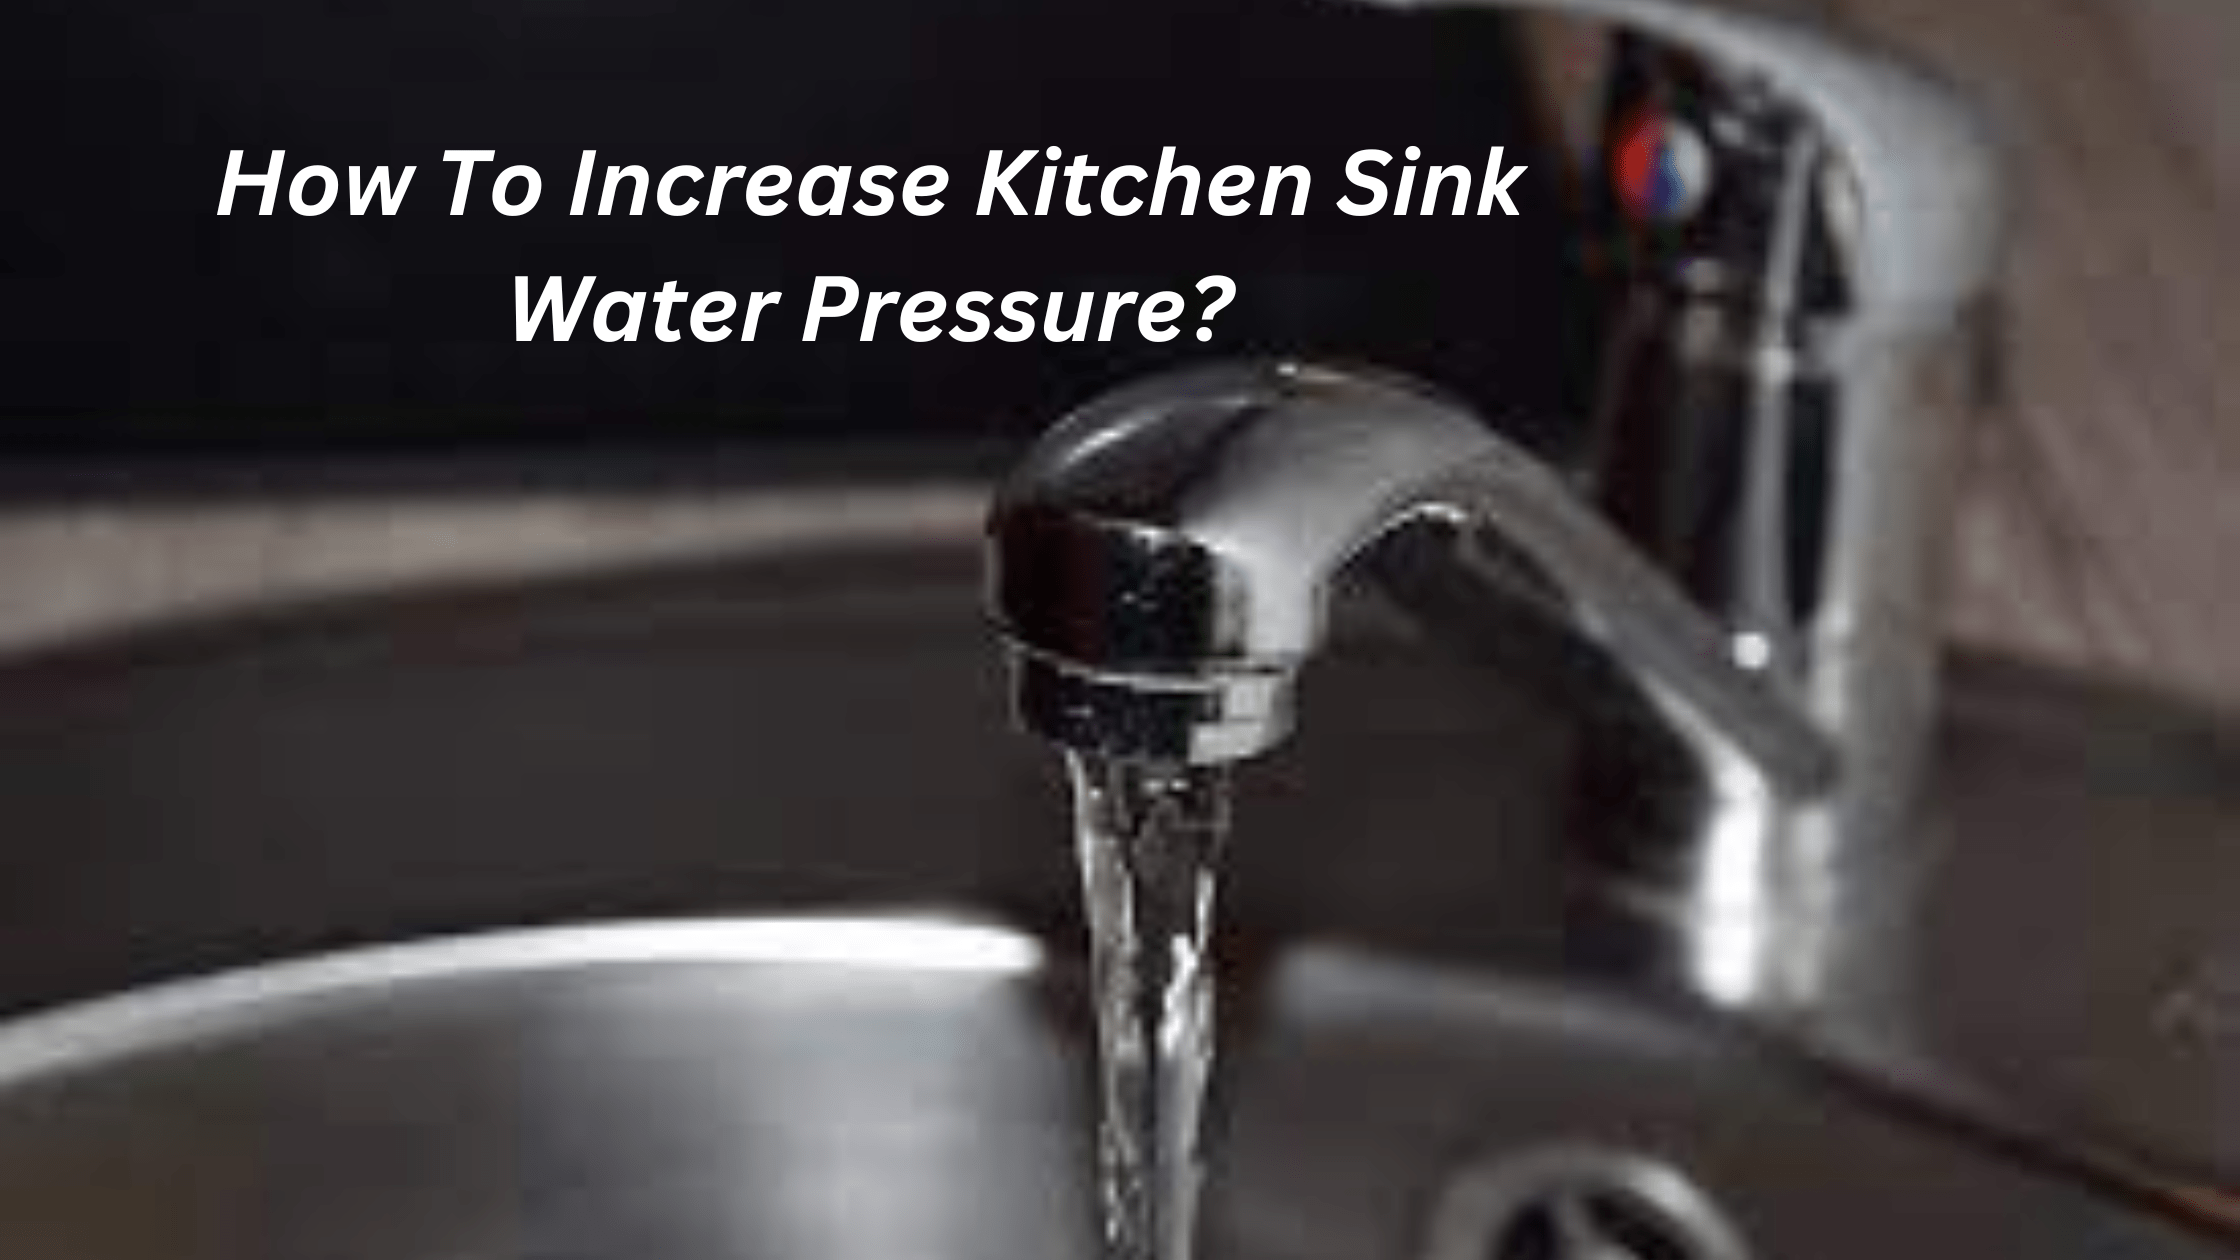 How To Increase Kitchen Sink Water Pressure?